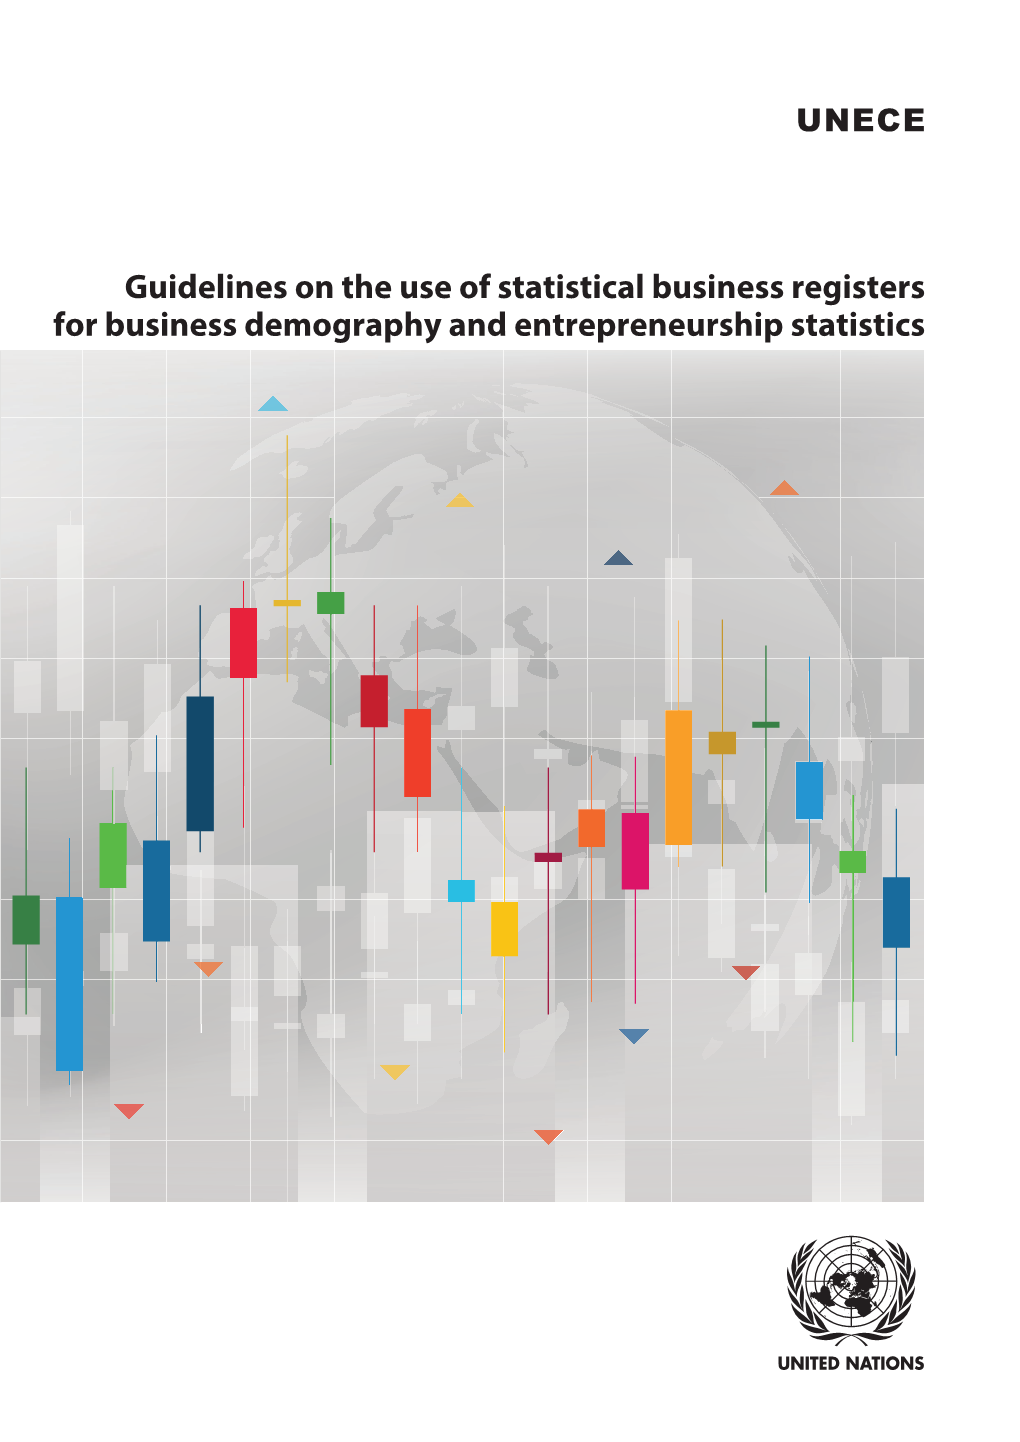 UNECE, Guidelines on the Use of Statistical Business Registers For